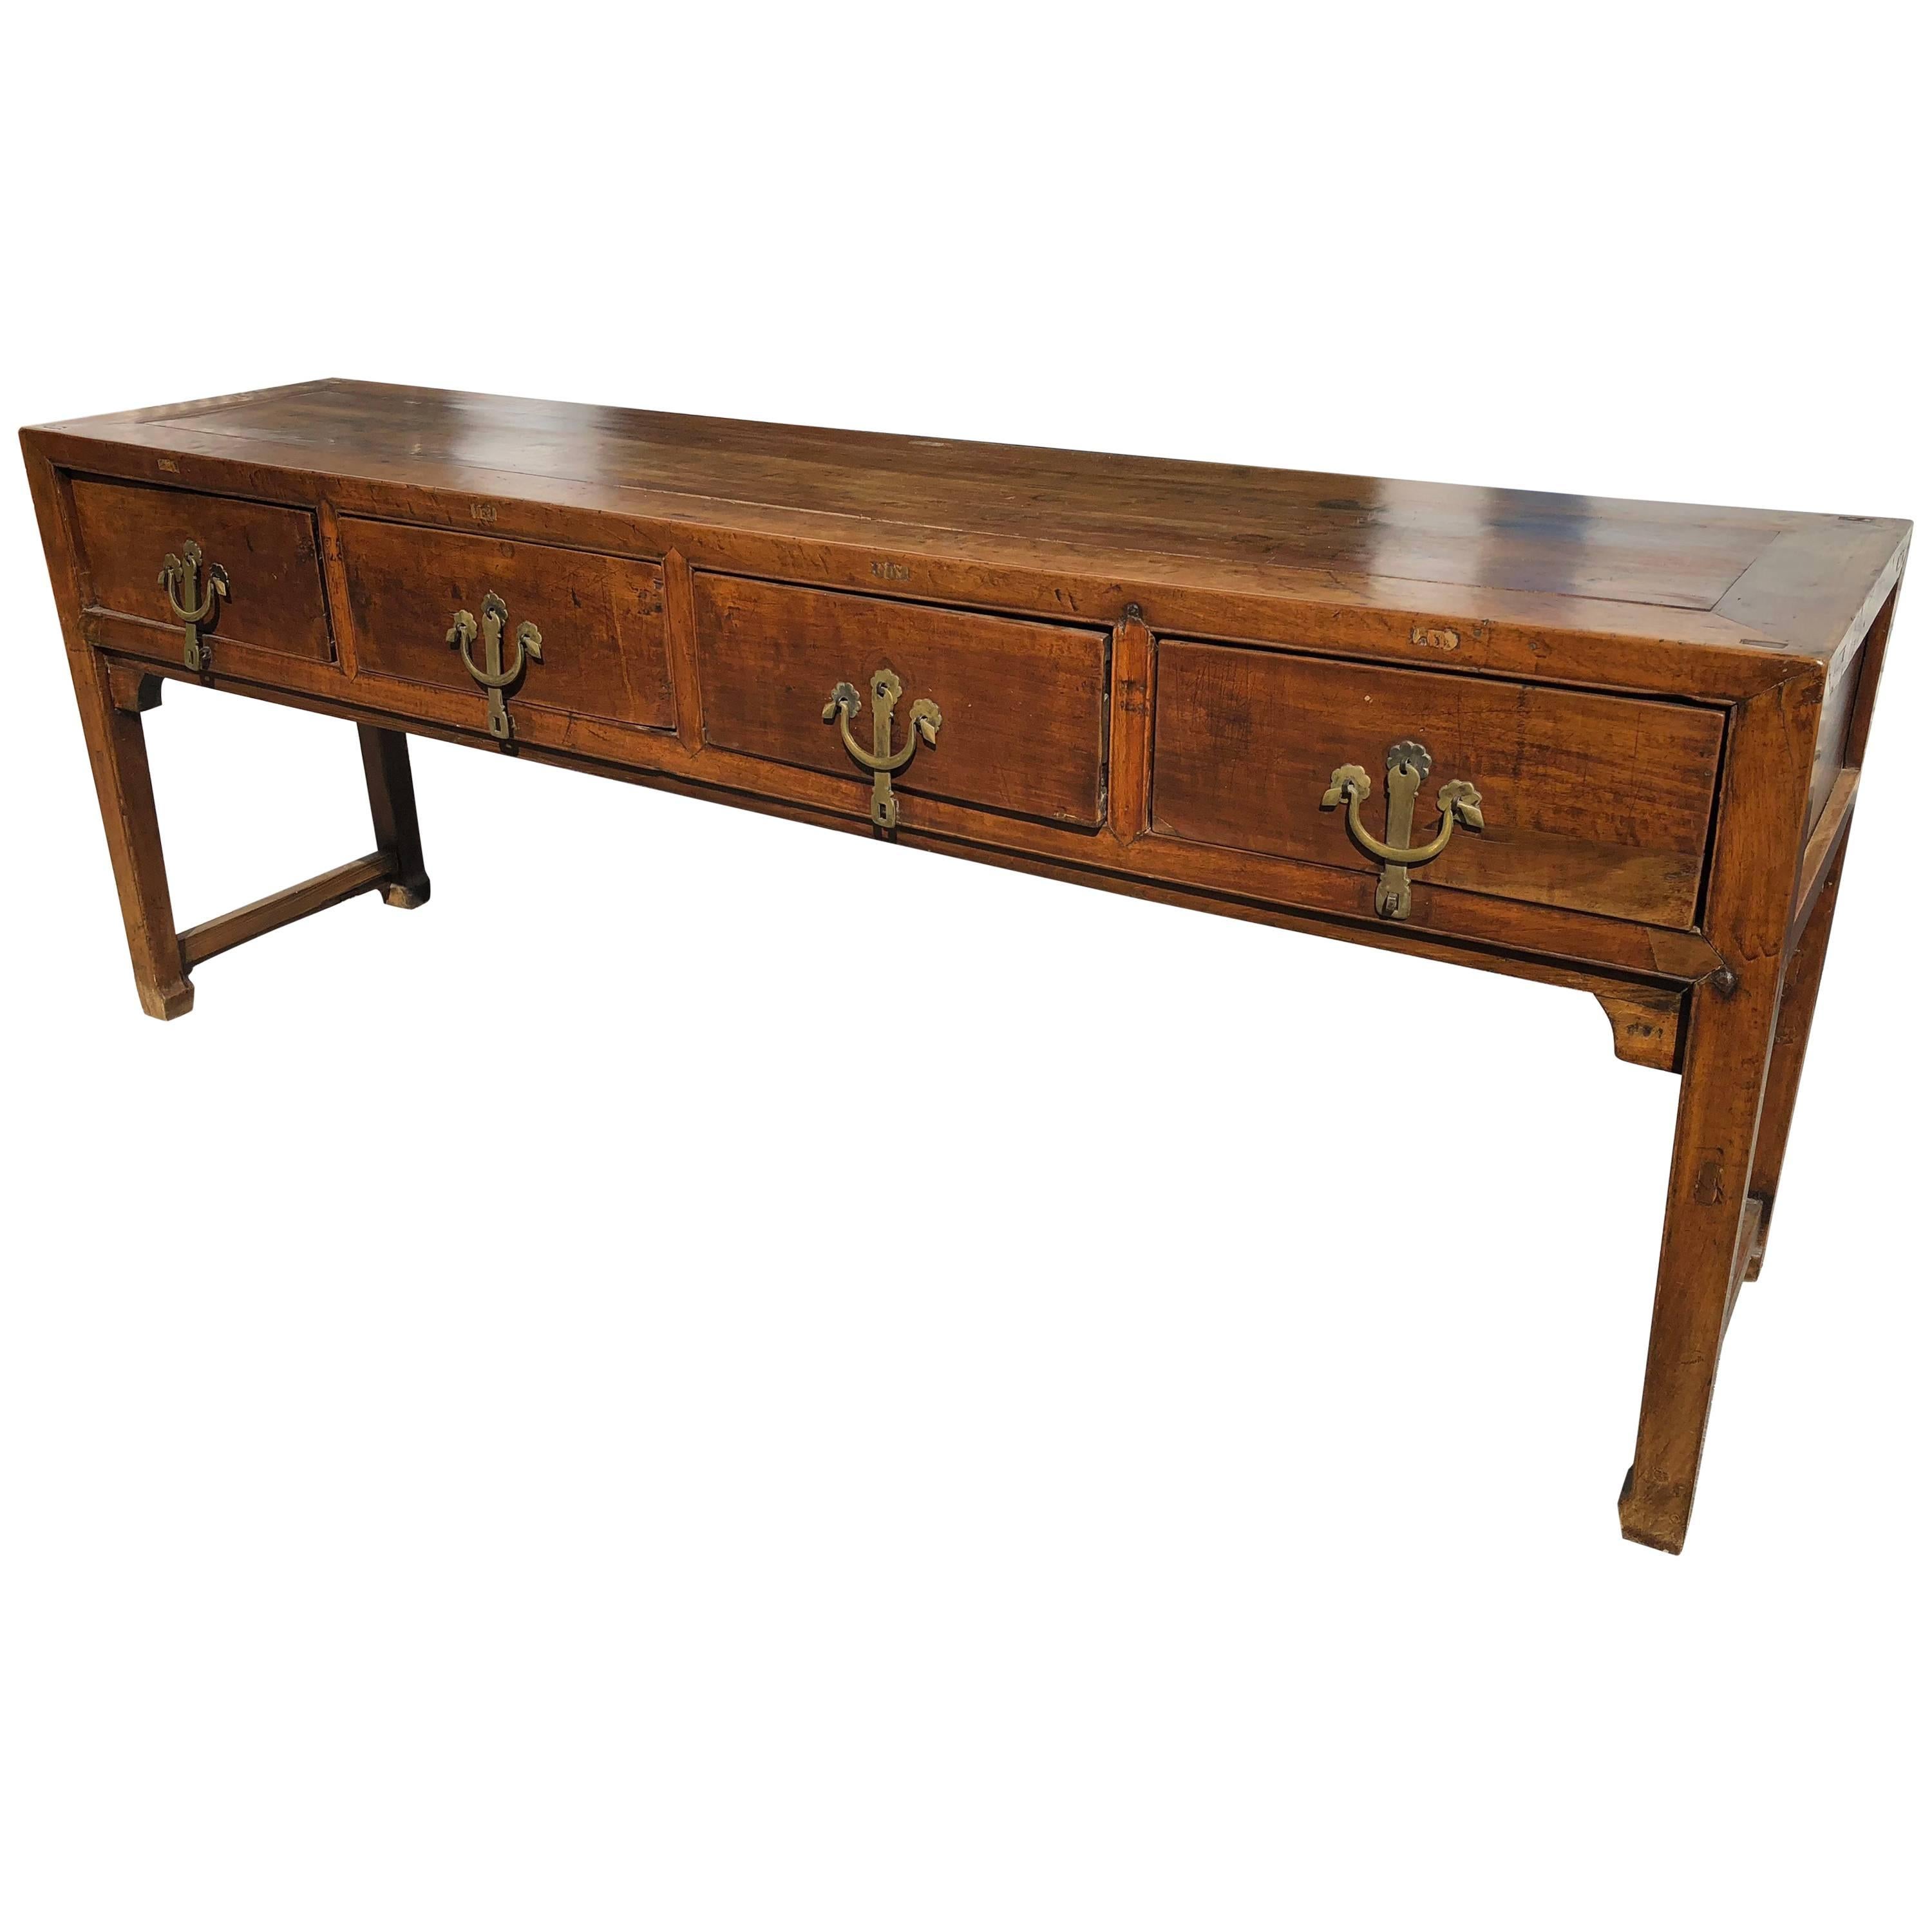 Chinese Sideboard or Sofa Table